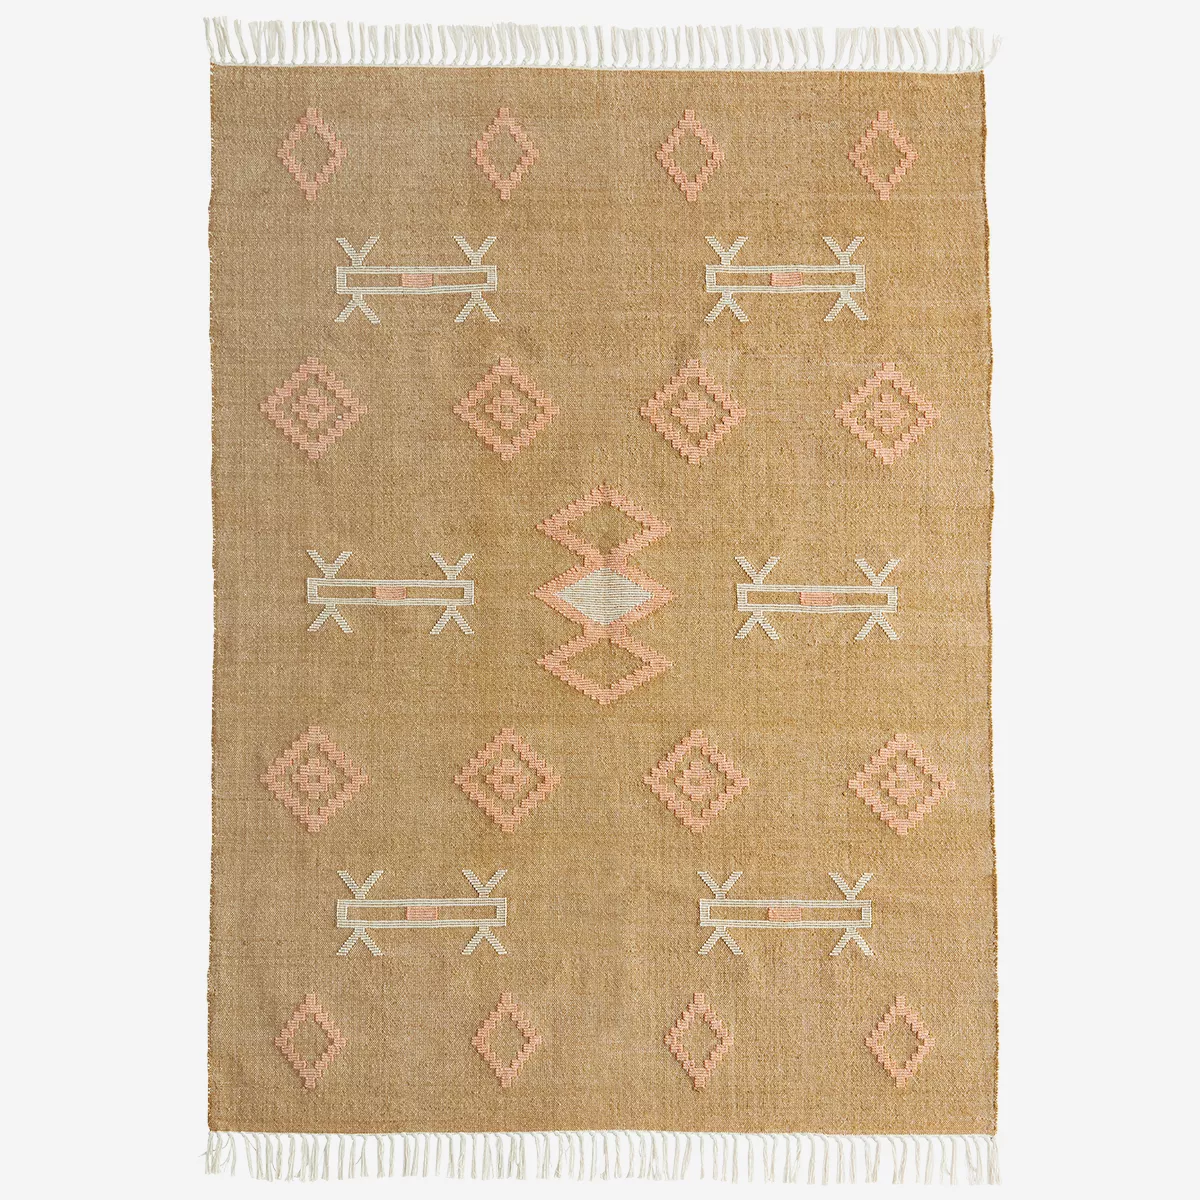 Handwoven Cotton Embroidered Rug